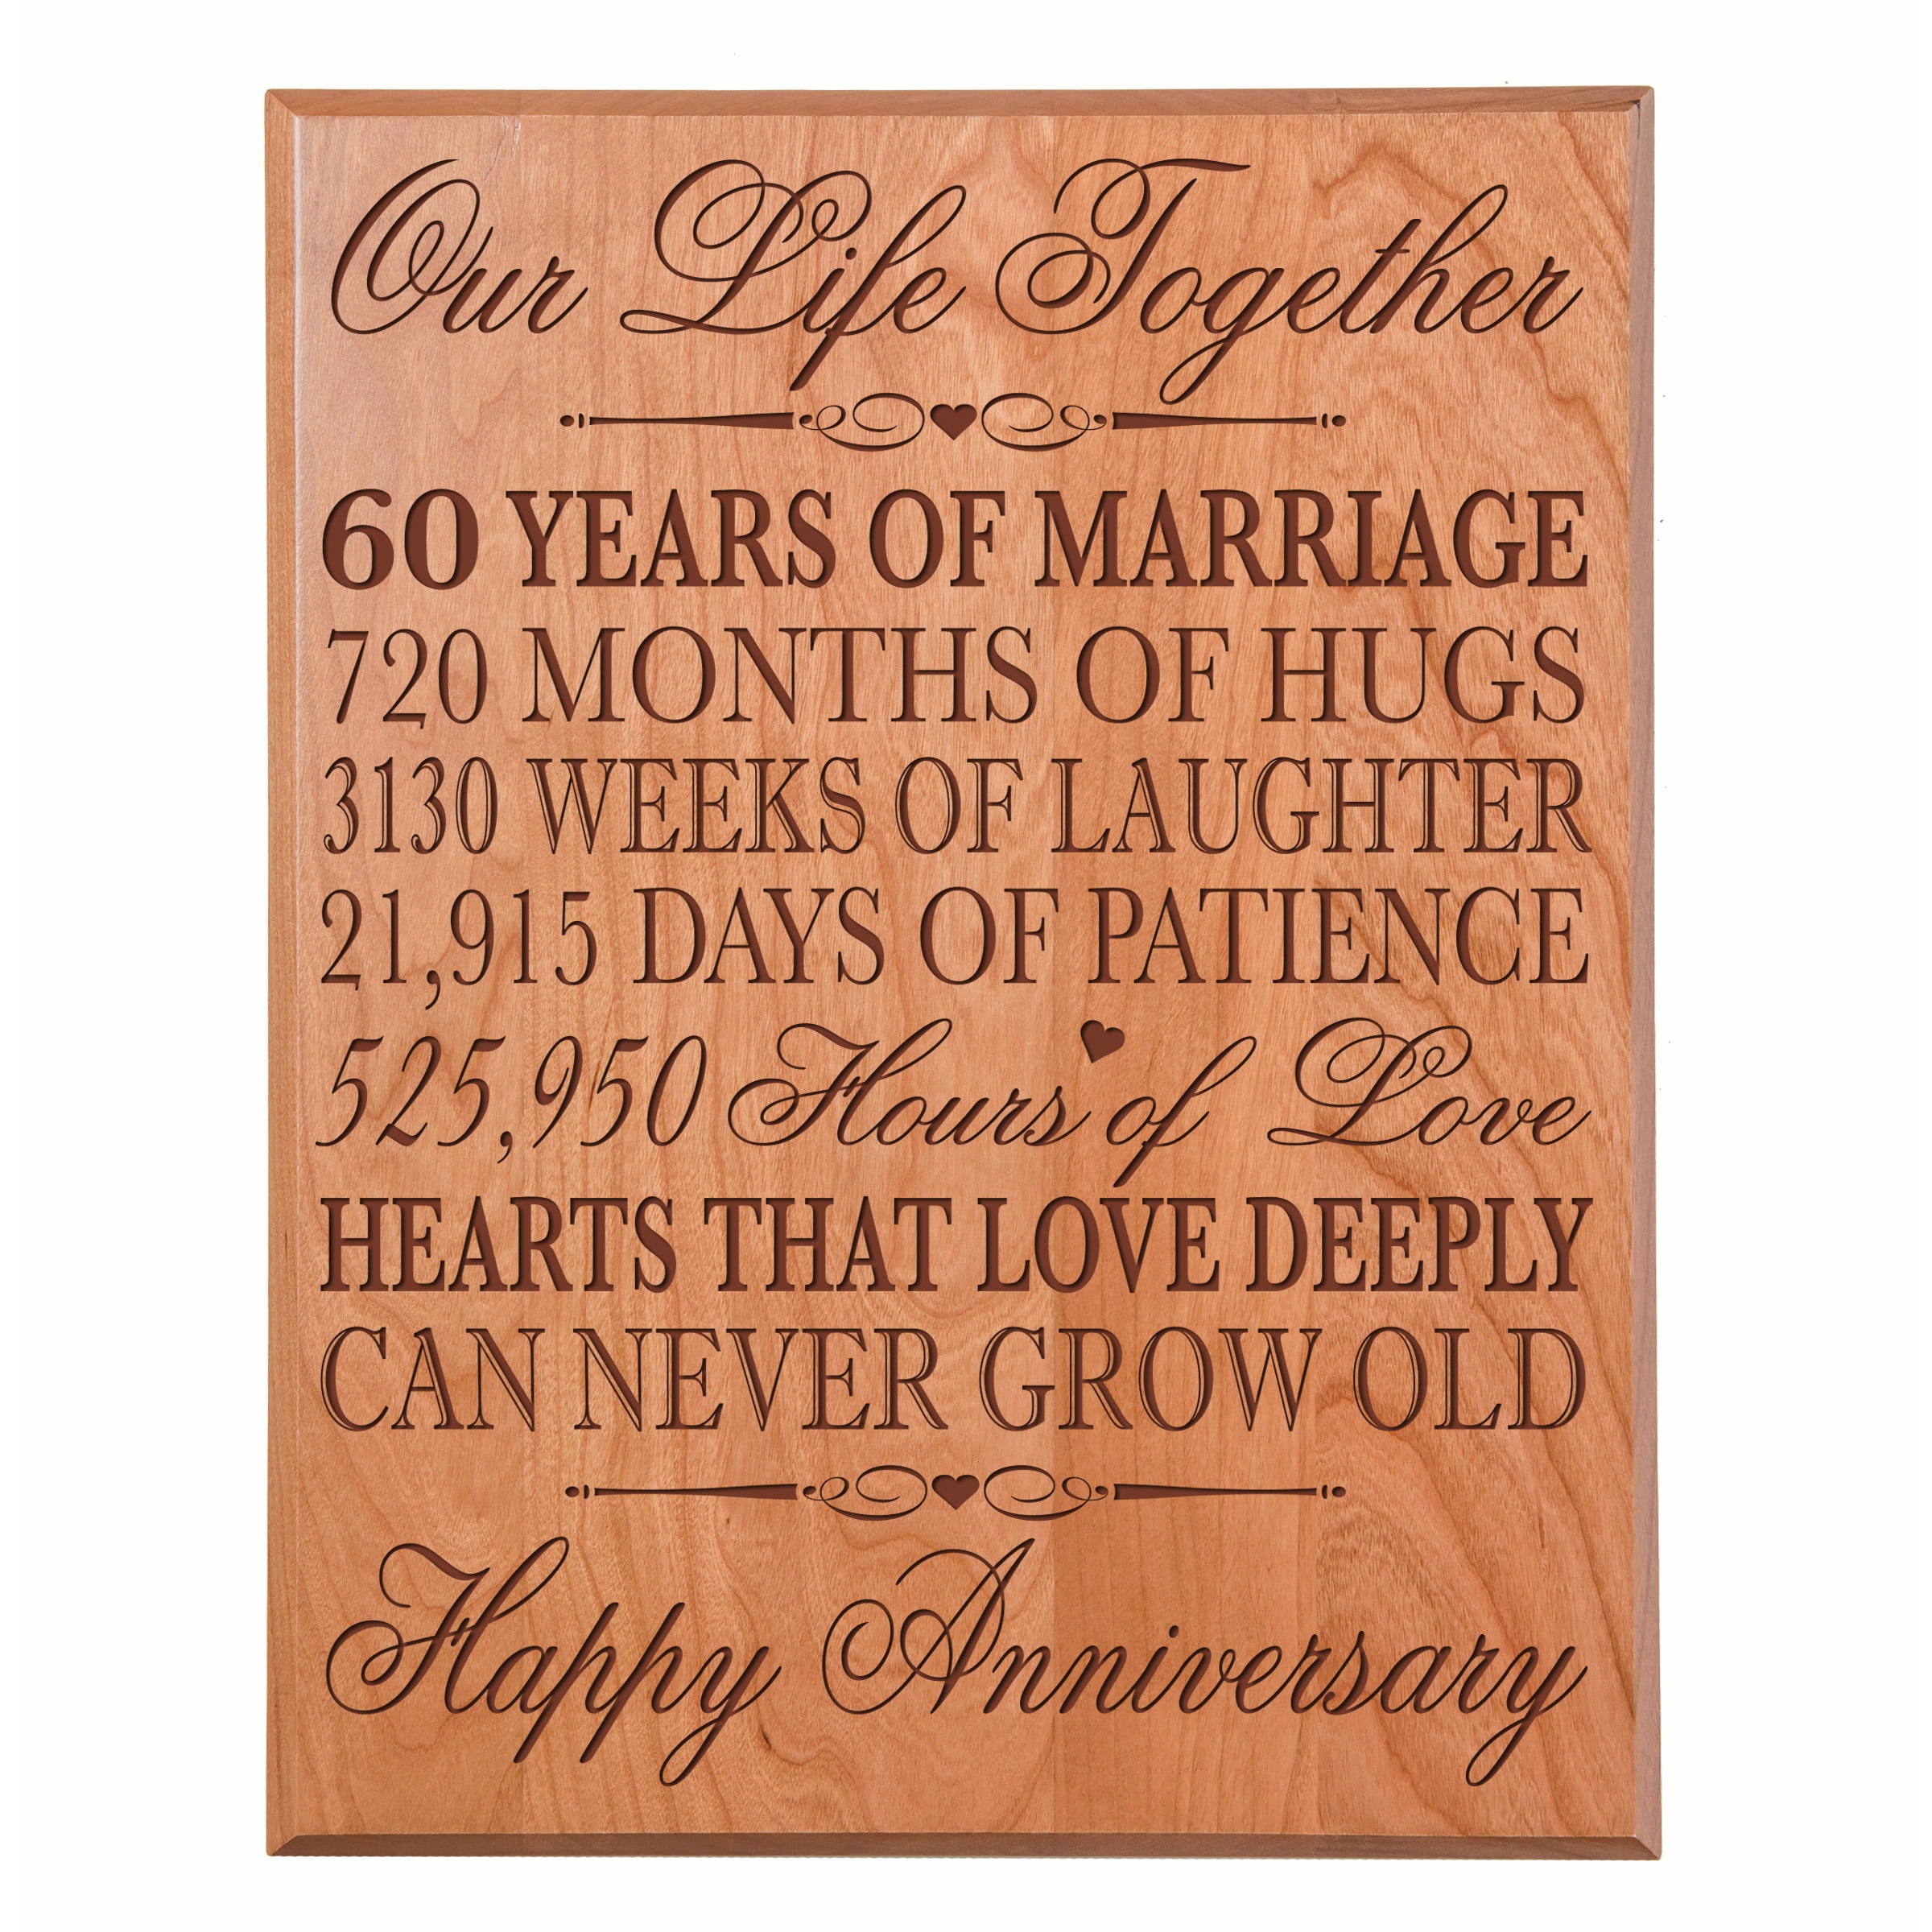 40th for Her,40th Wedding for Him 12 W X 15 H Wall Plaque LifeSong Milestones 40th Wedding Anniversary Wall Plaque Gifts for Couple Walnut